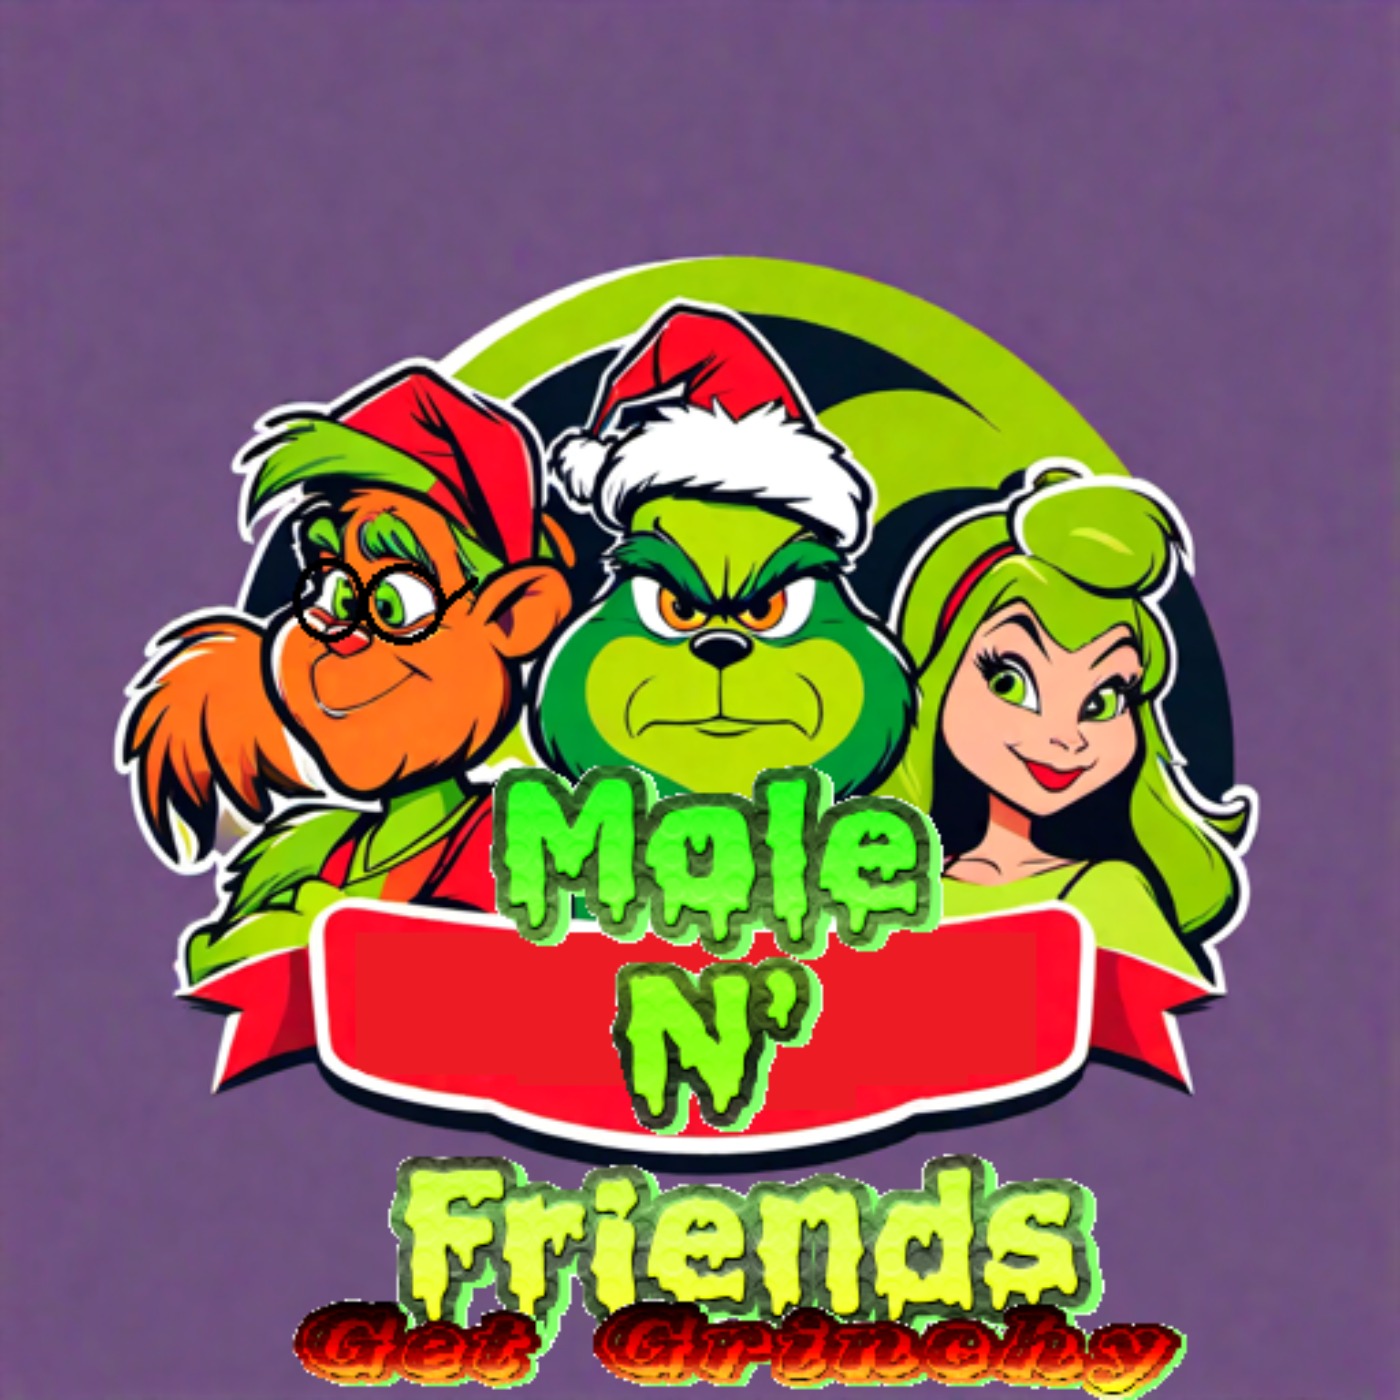 cover art for Lost Media: How The Grinch Stole Christmas as read by Mole, Zane and Nicki Sombrero